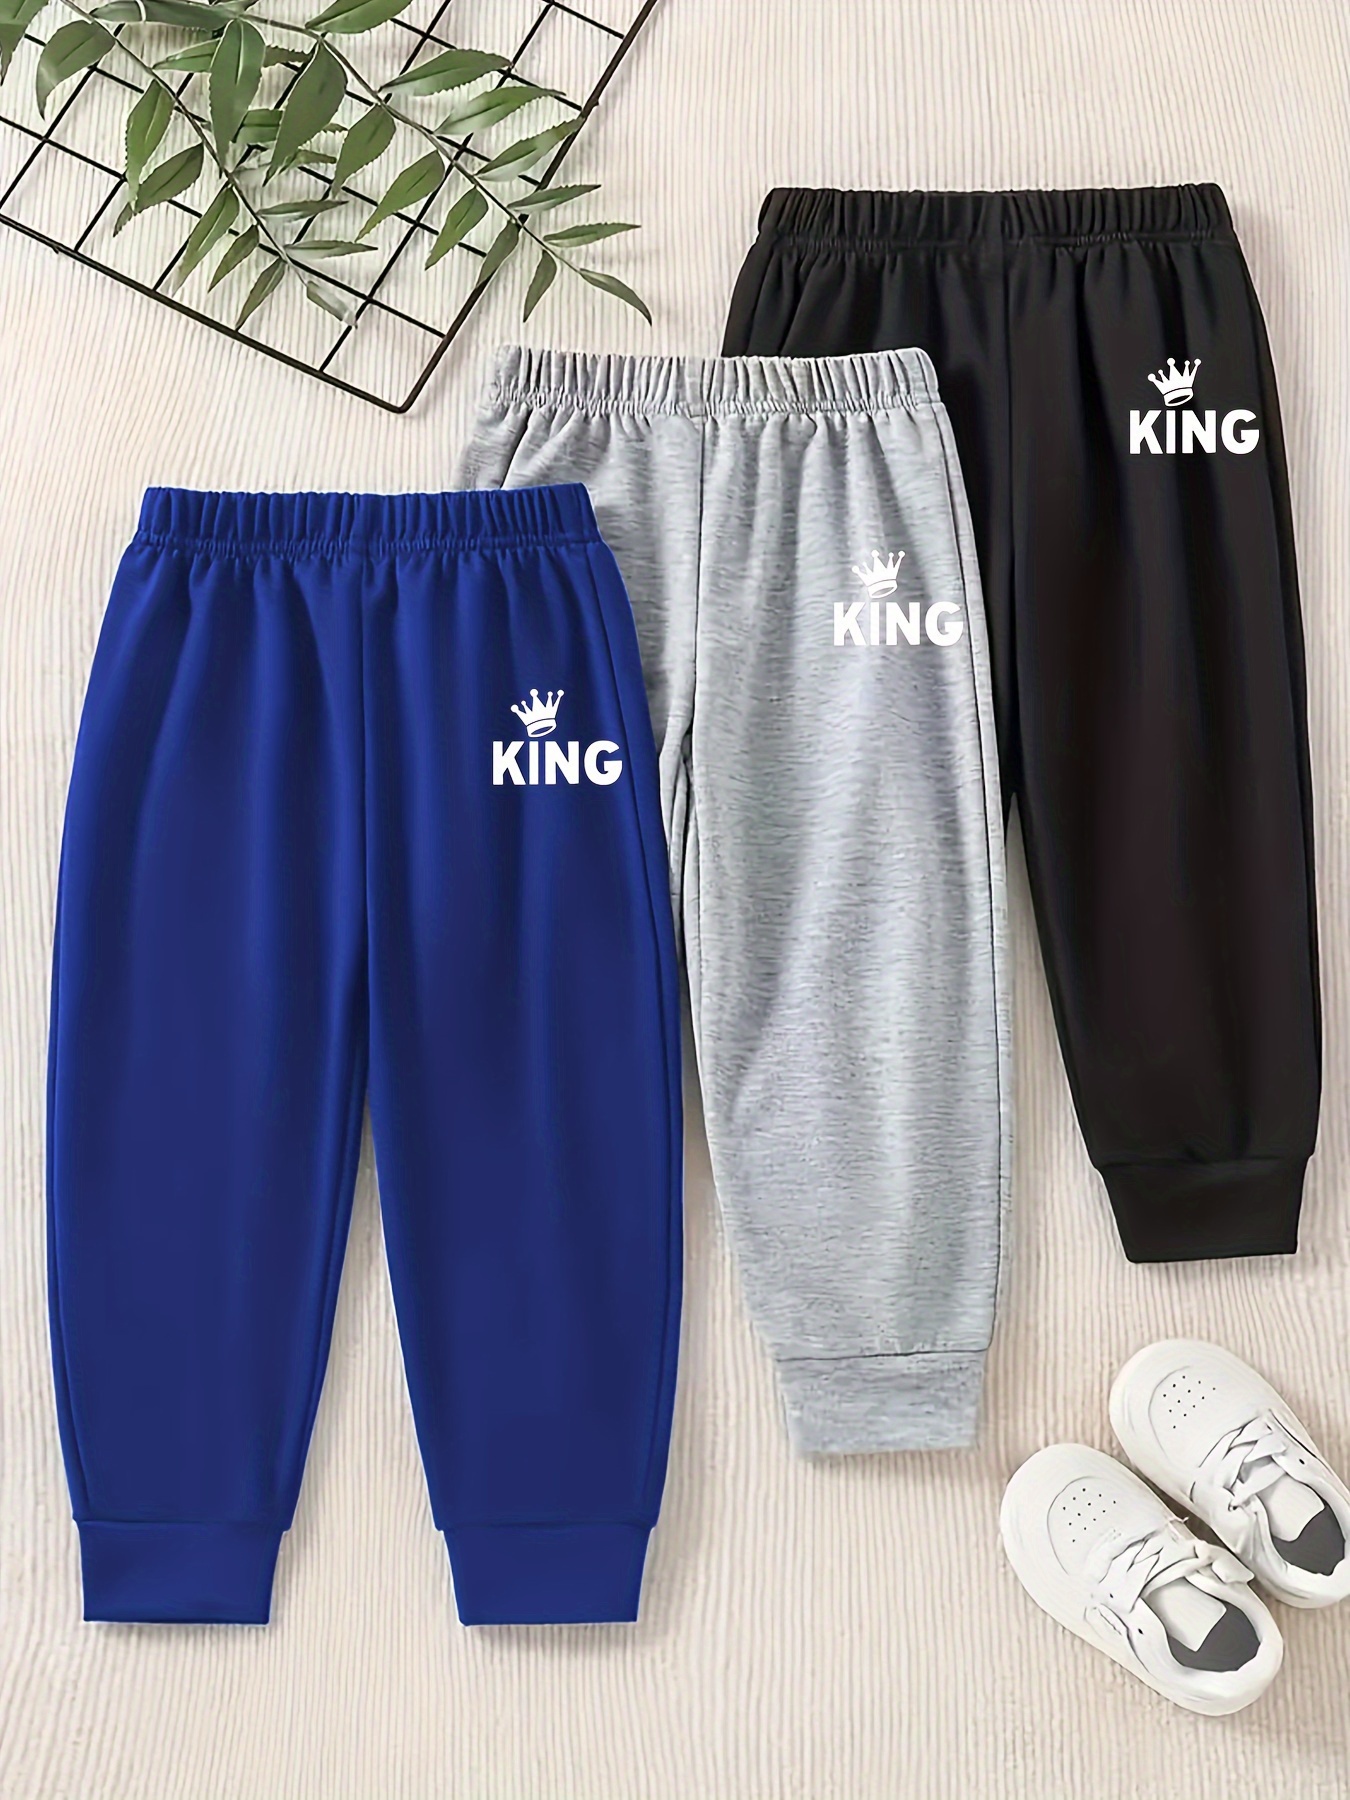 Kingstar123 Jogger Pants for Boys Kids Thin Sports Trousers Loose Casual  Printed Mosquito Repellent Summer